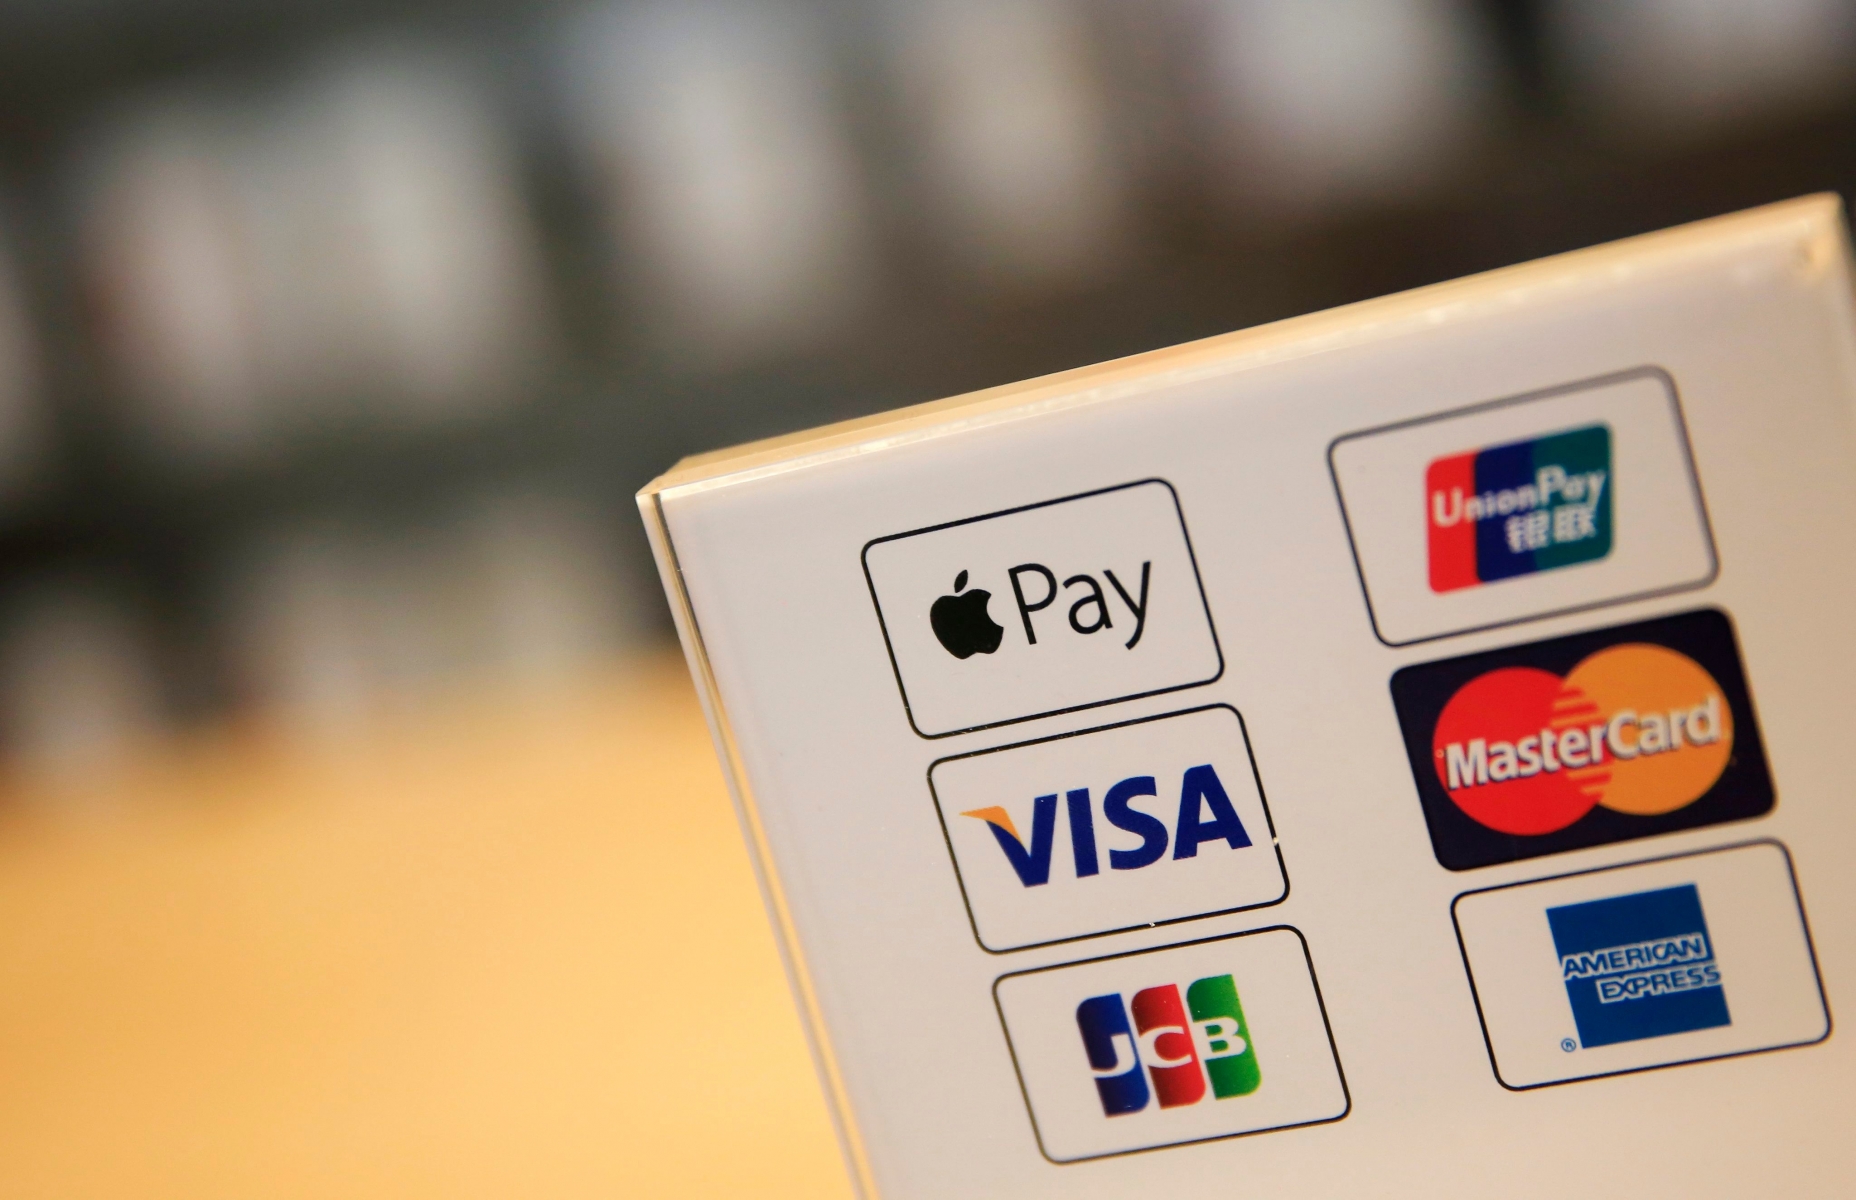 THEMENBILD ZUM START VON APPLE PAY IN DER SCHWEIZ --- An Apple Pay service logo is seen along with other major payment services logos at a cashier in an Apple store in Beijing, China, 18 February 2016. US electronics giant Apple Inc. launched its mobile payment service Apple Pay in China amid strong competition from local players like Wechat Payment and Alipay.  EPA/HOW HWEE YOUNG SCHWEIZ APPLE PAY